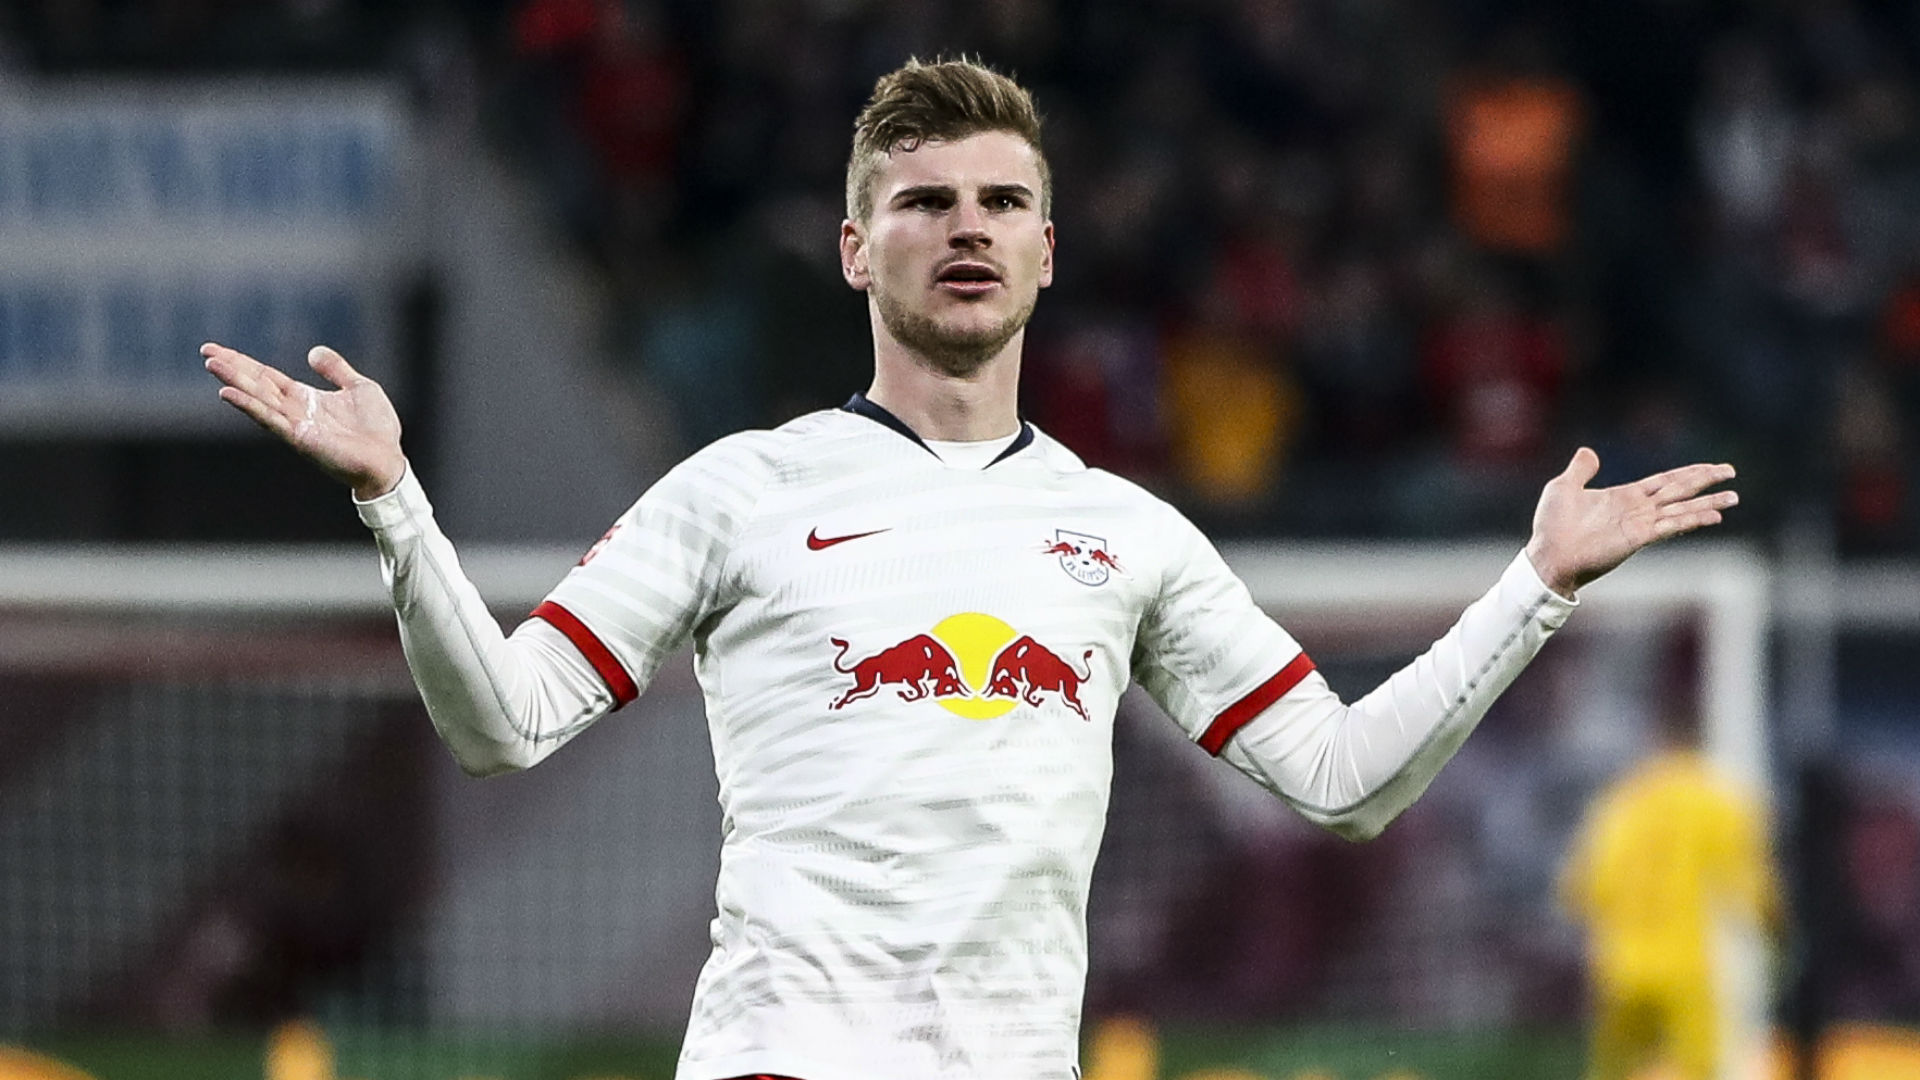 Timo Werner has been linked with a move to Liverpool, but Chelsea are seemingly set to land the RB Leipzig forward.